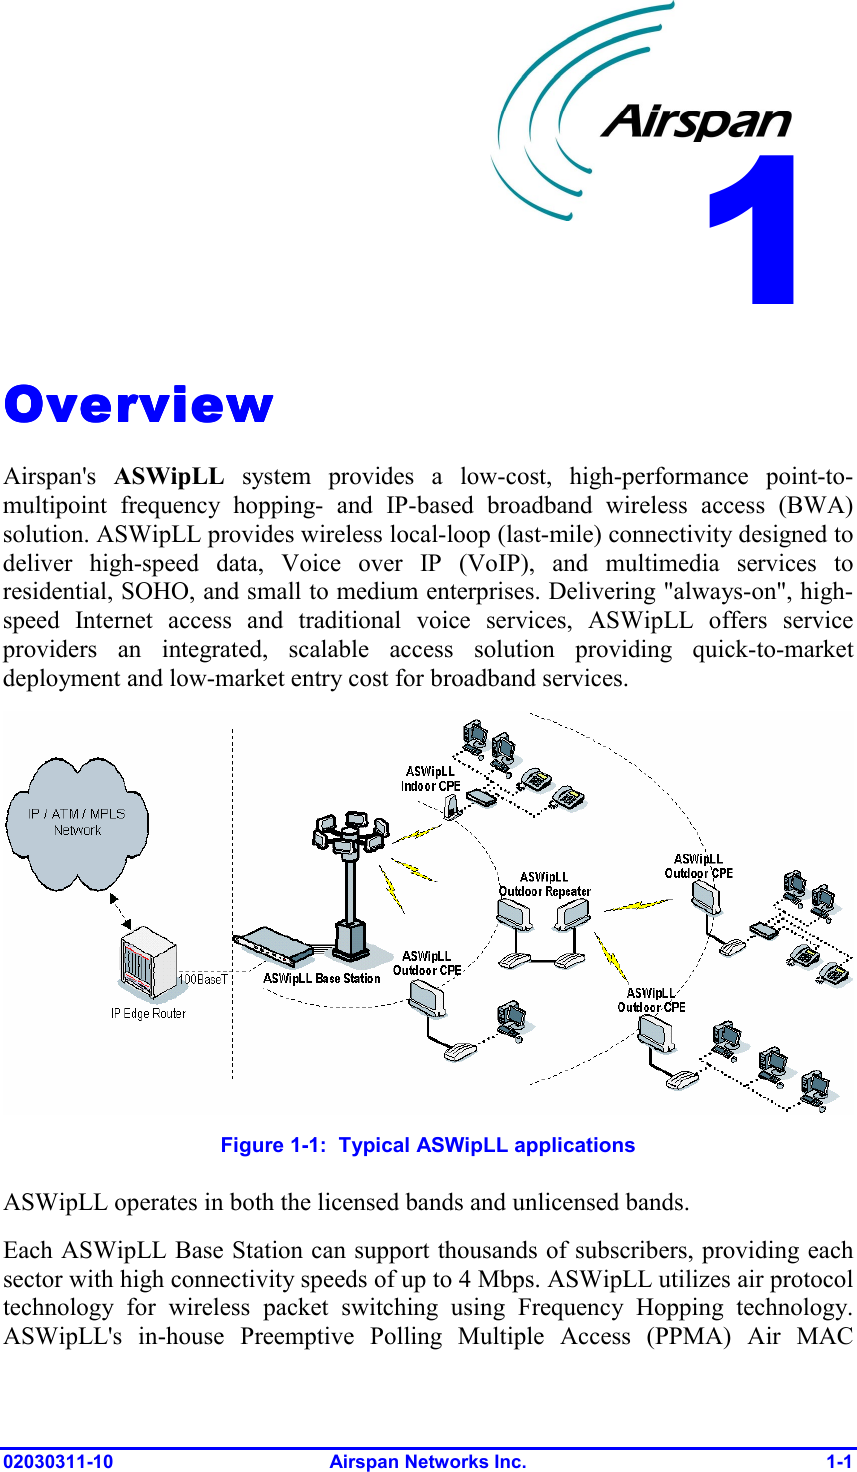  02030311-10 Airspan Networks Inc.  1-1 OverviewOverviewOverviewOverview    Airspan&apos;s  ASWipLL system provides a low-cost, high-performance point-to-multipoint frequency hopping- and IP-based broadband wireless access (BWA) solution. ASWipLL provides wireless local-loop (last-mile) connectivity designed to deliver high-speed data, Voice over IP (VoIP), and multimedia services to residential, SOHO, and small to medium enterprises. Delivering &quot;always-on&quot;, high-speed Internet access and traditional voice services, ASWipLL offers service providers an integrated, scalable access solution providing quick-to-market deployment and low-market entry cost for broadband services.  Figure  1-1:  Typical ASWipLL applications ASWipLL operates in both the licensed bands and unlicensed bands.  Each ASWipLL Base Station can support thousands of subscribers, providing each sector with high connectivity speeds of up to 4 Mbps. ASWipLL utilizes air protocol technology for wireless packet switching using Frequency Hopping technology. ASWipLL&apos;s in-house Preemptive Polling Multiple Access (PPMA) Air MAC 1 